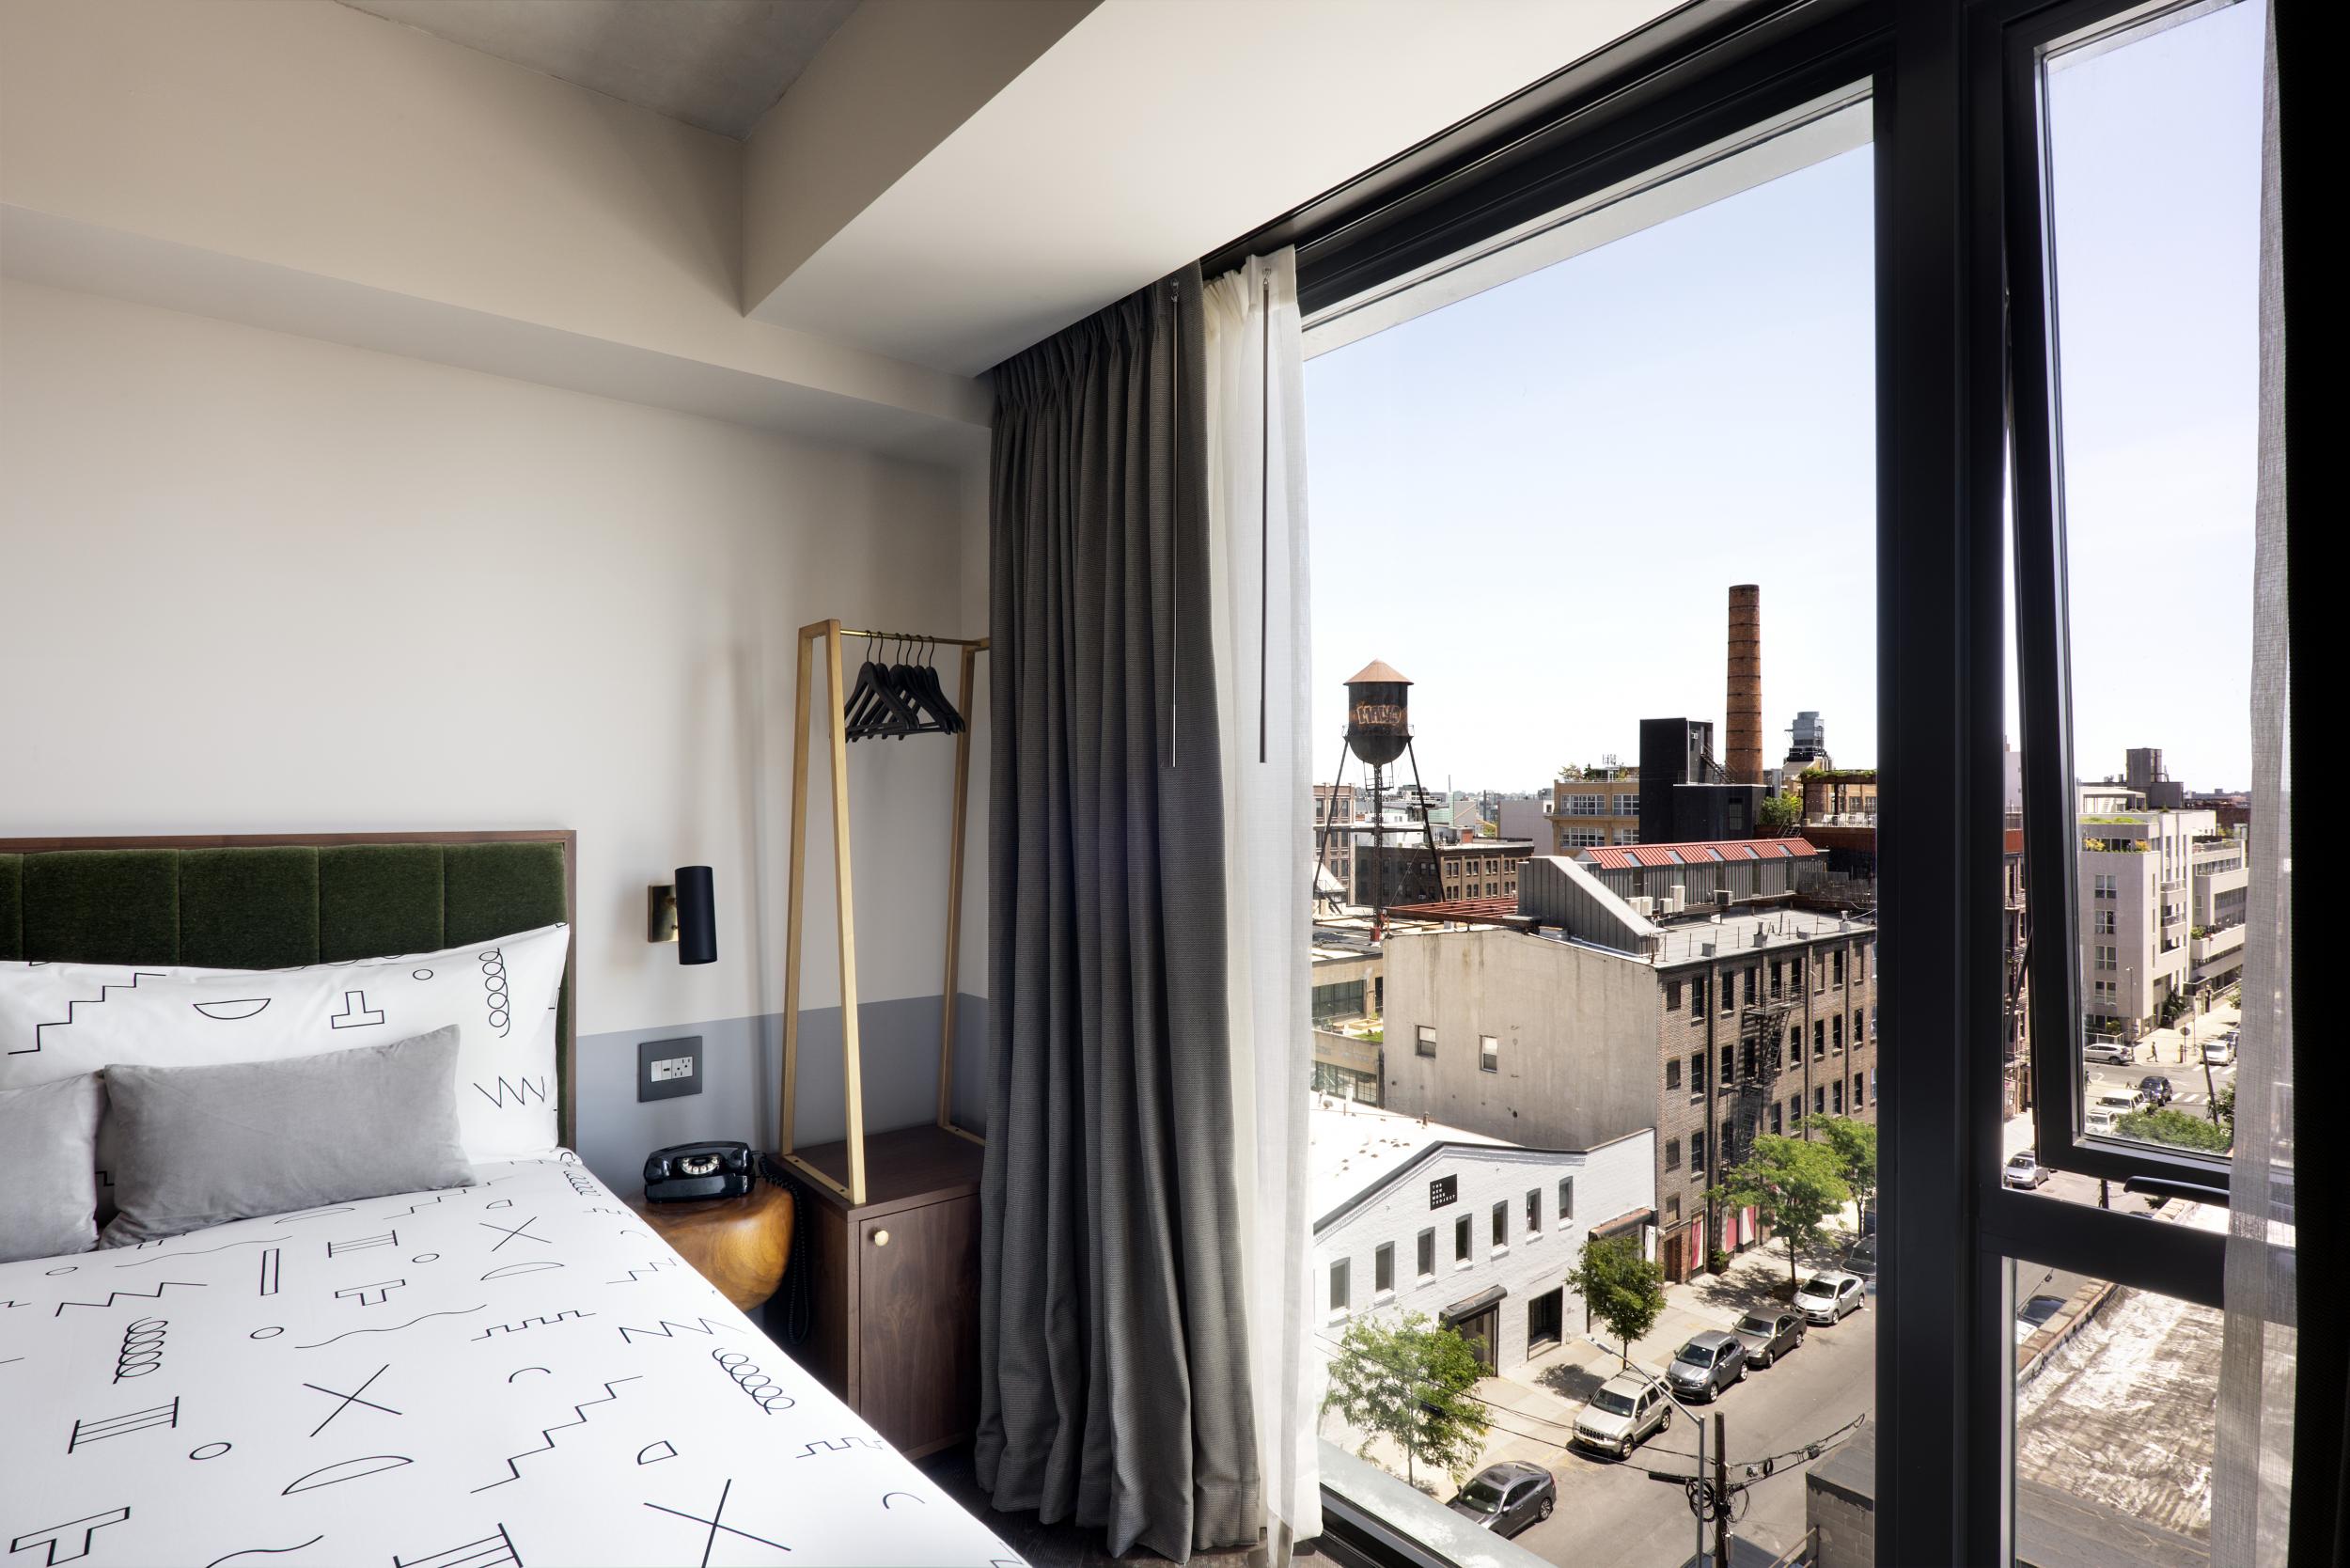 Rooms at The Hoxton, Williamsburg, offer great city views